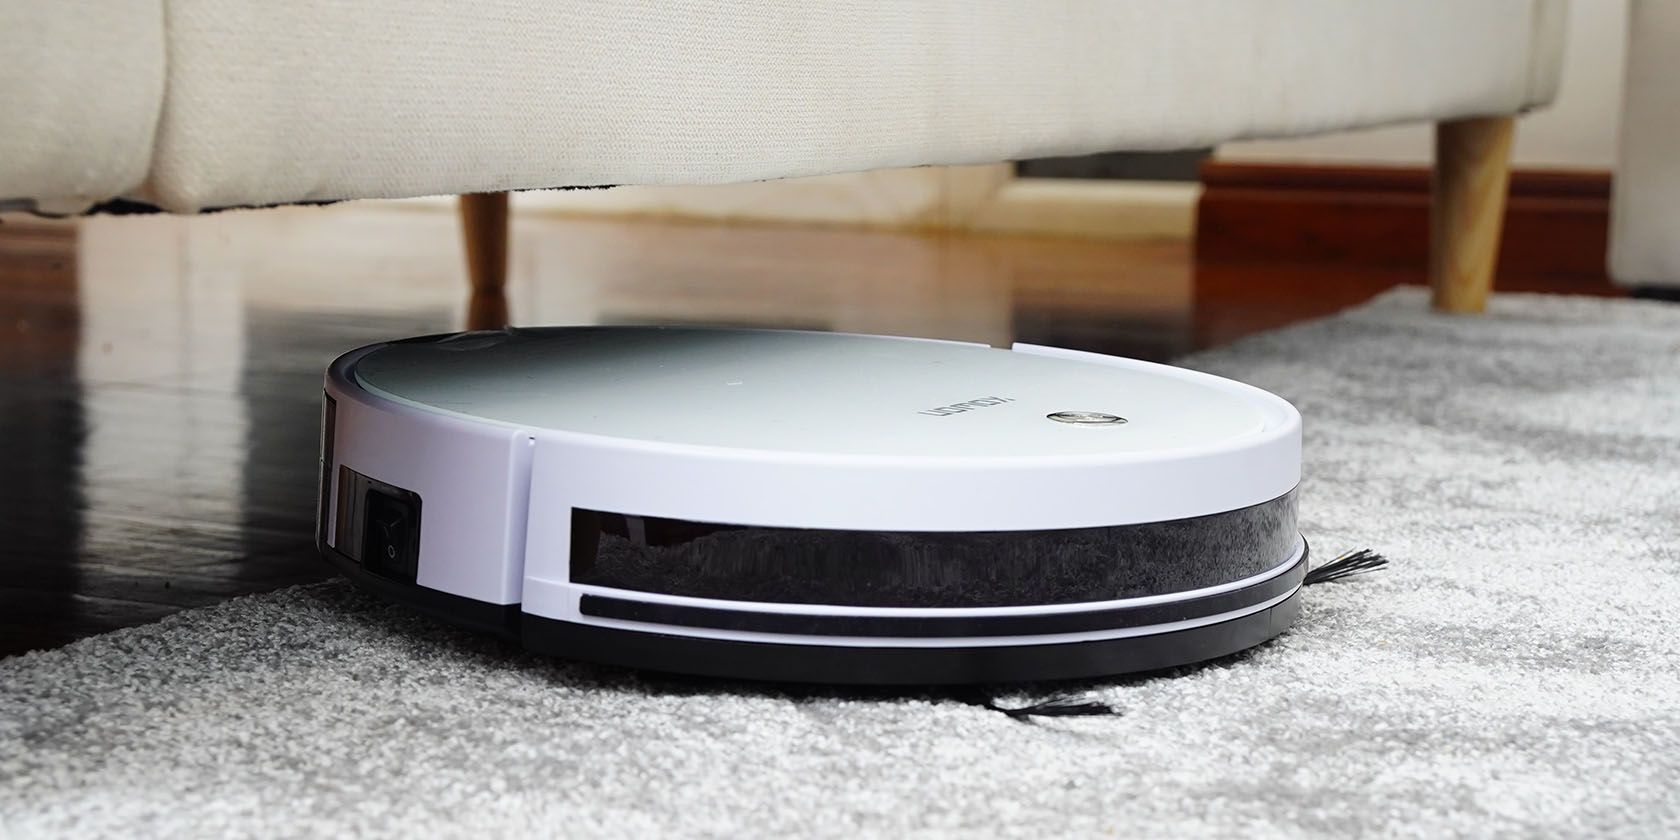 Robot vacuum going under couch